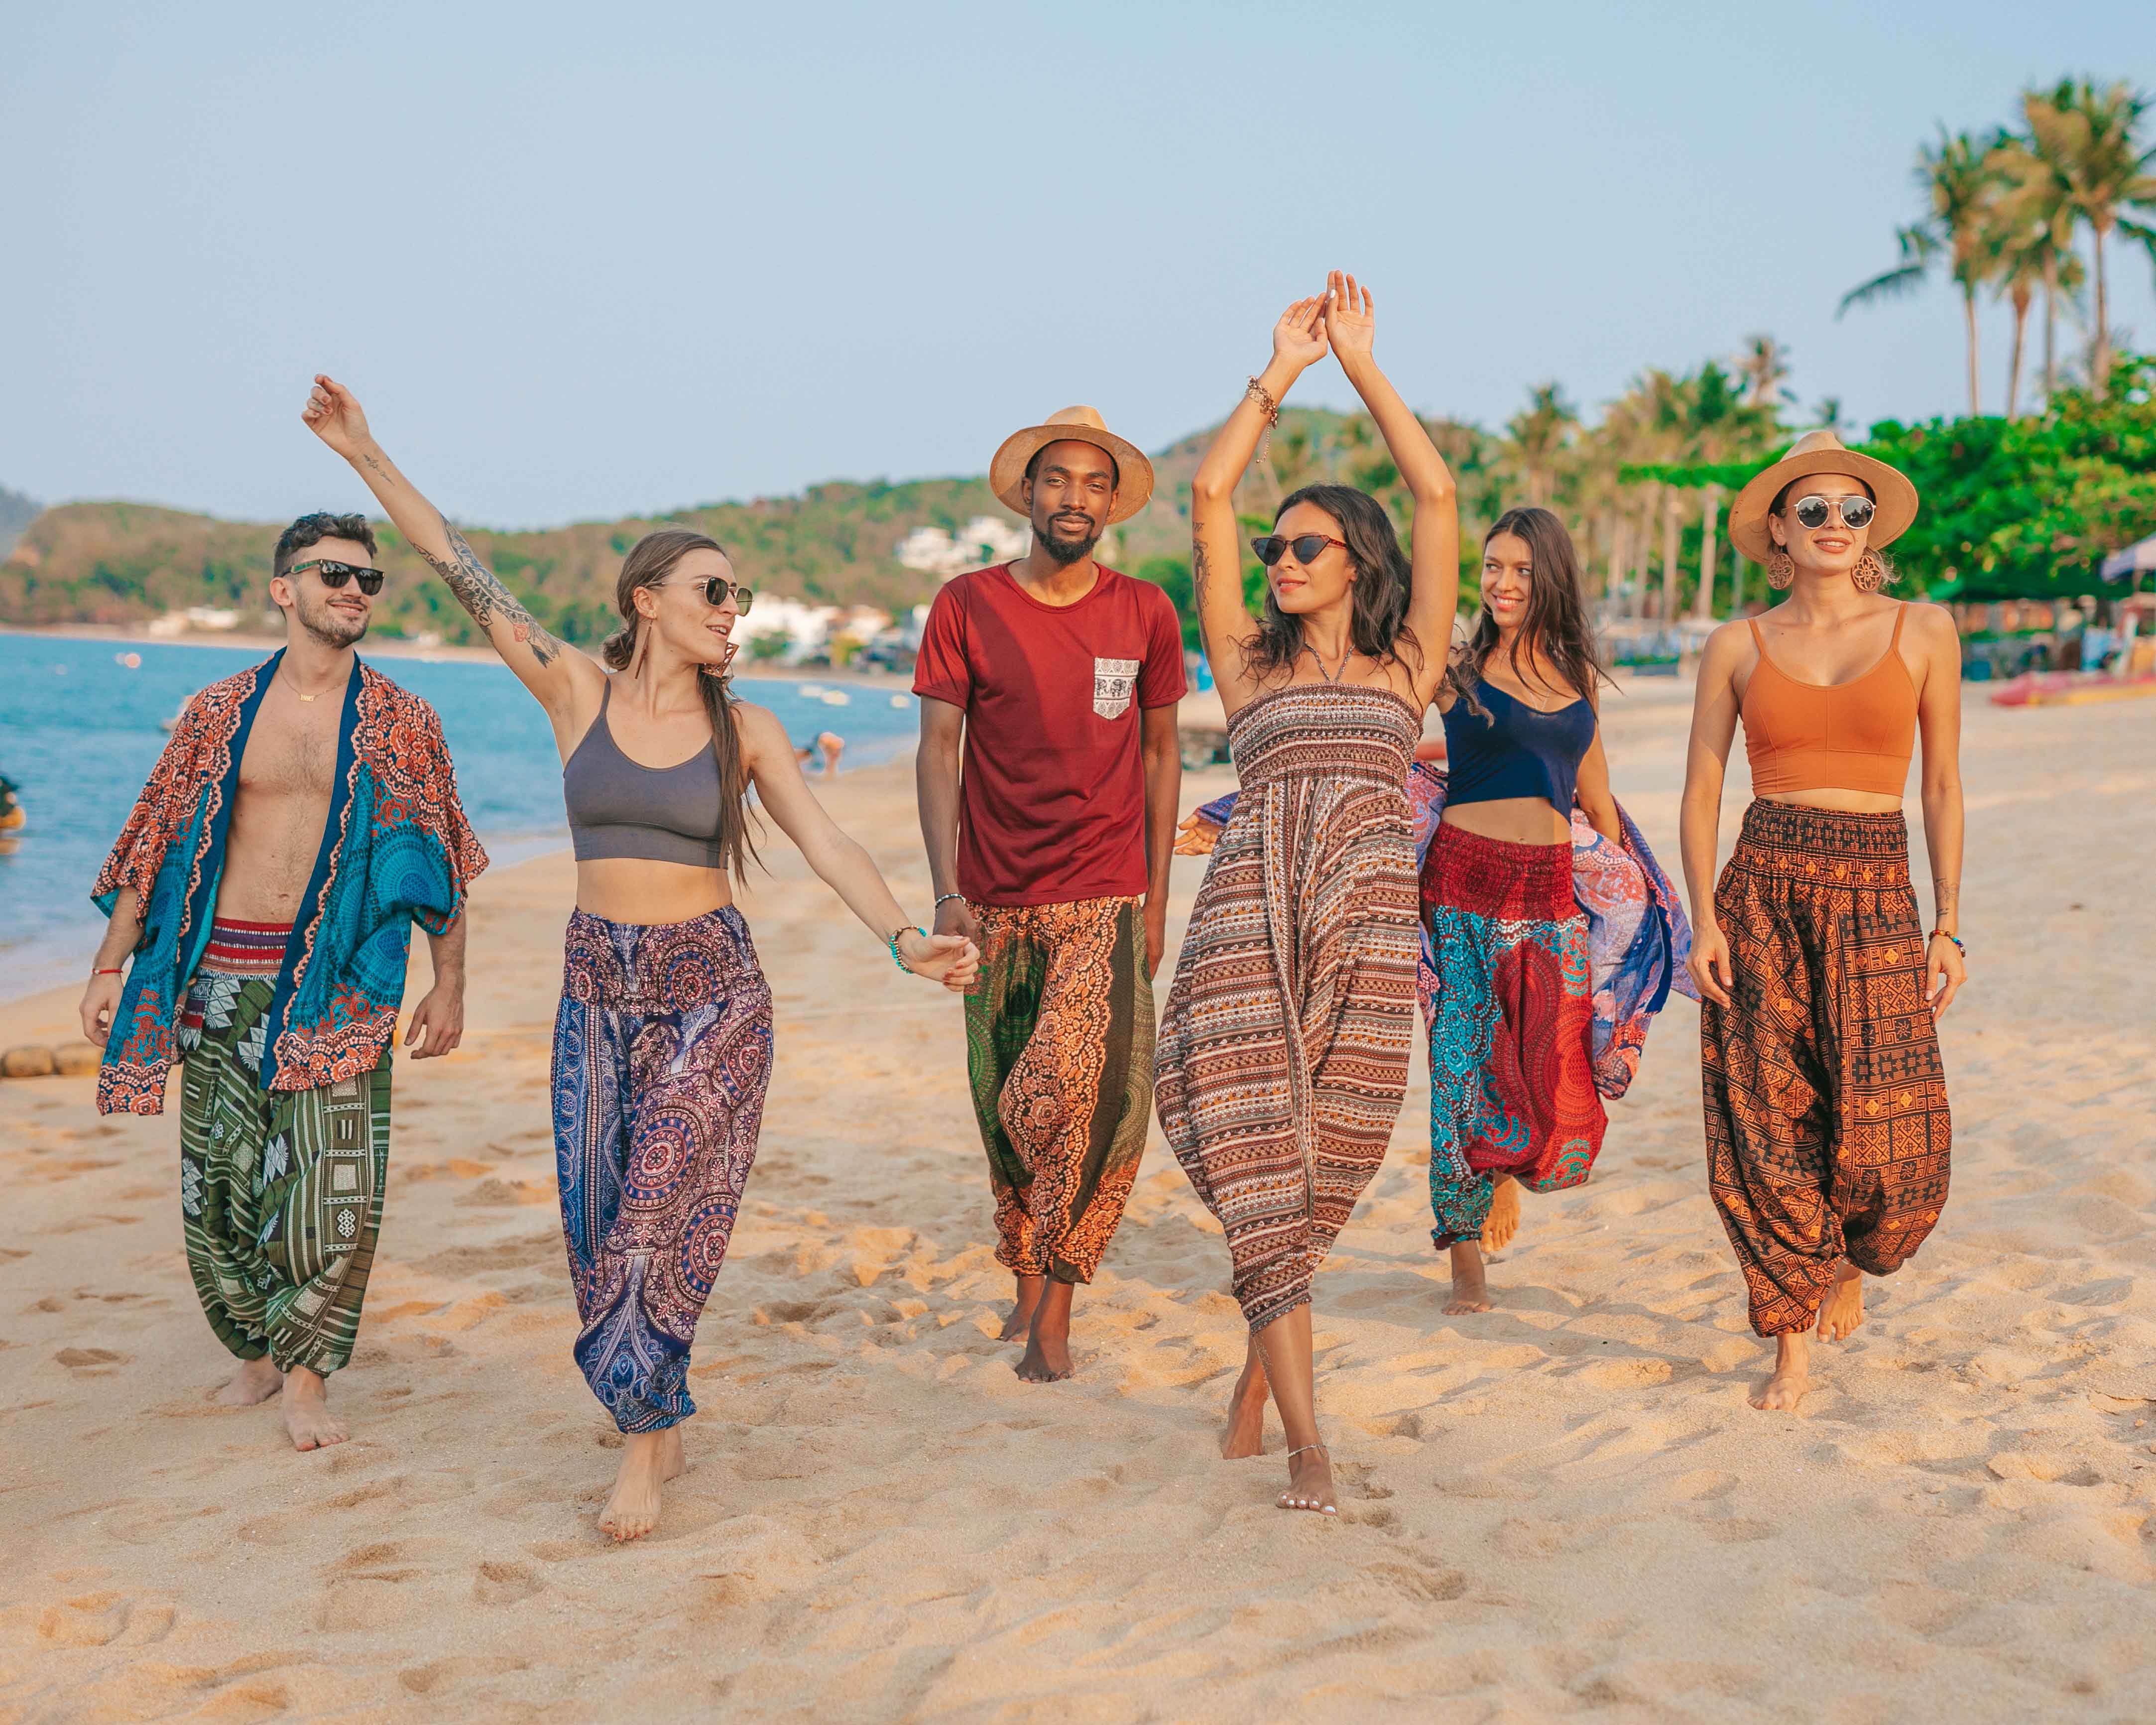 AGRABAH YOGA PANTS Elepanta Yoga | Hippie Pants - Buy Today Elephant Pants Jewelry And Bohemian Clothes Handmade In Thailand Help To Save The Elephants FairTrade And Vegan